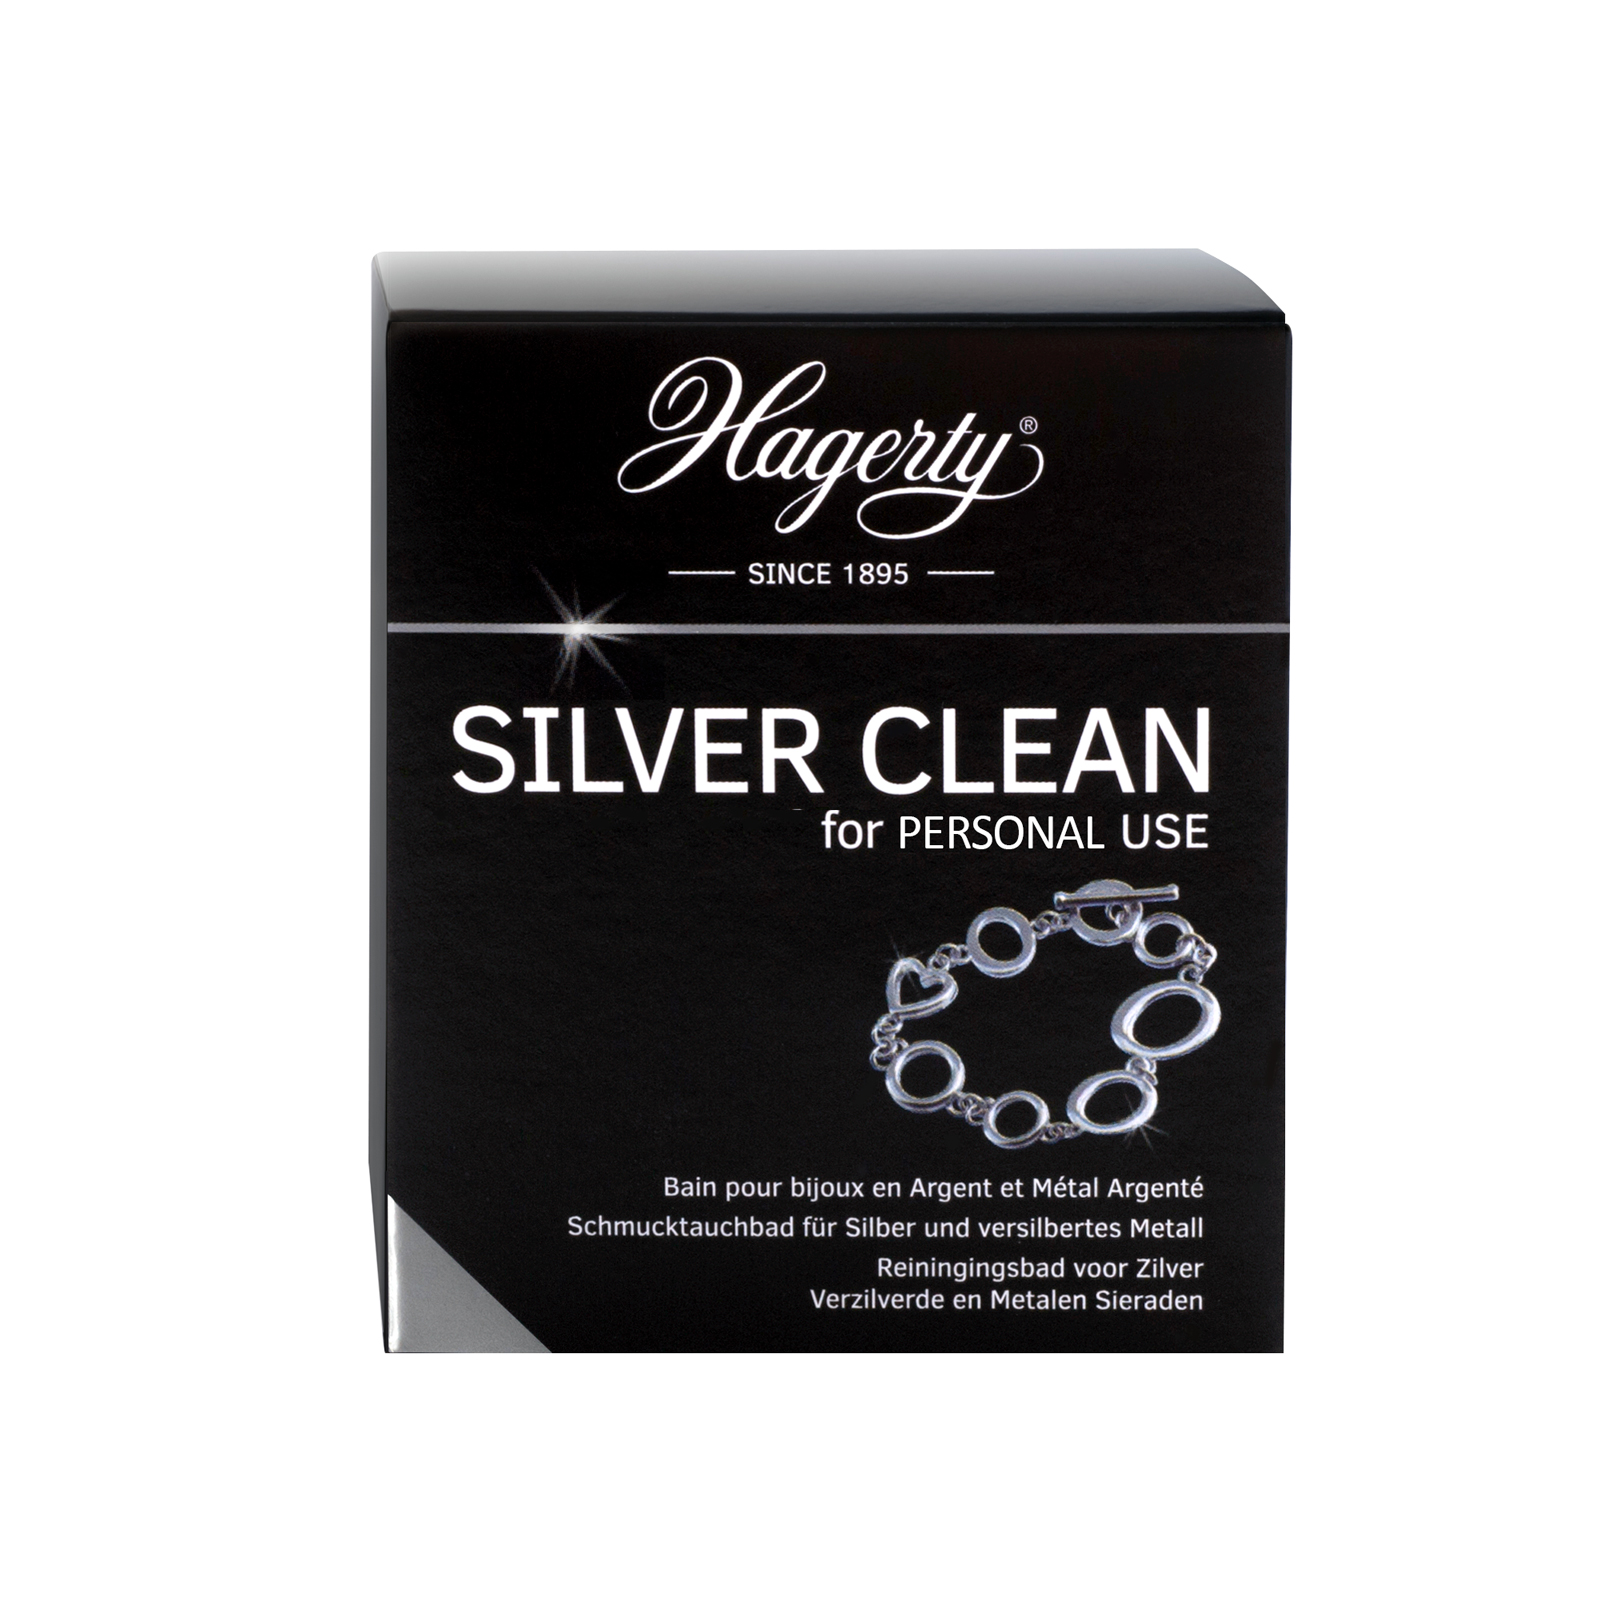 Hagerty Silver Clean for personal use, Tauchbad für Silber, 170 ml